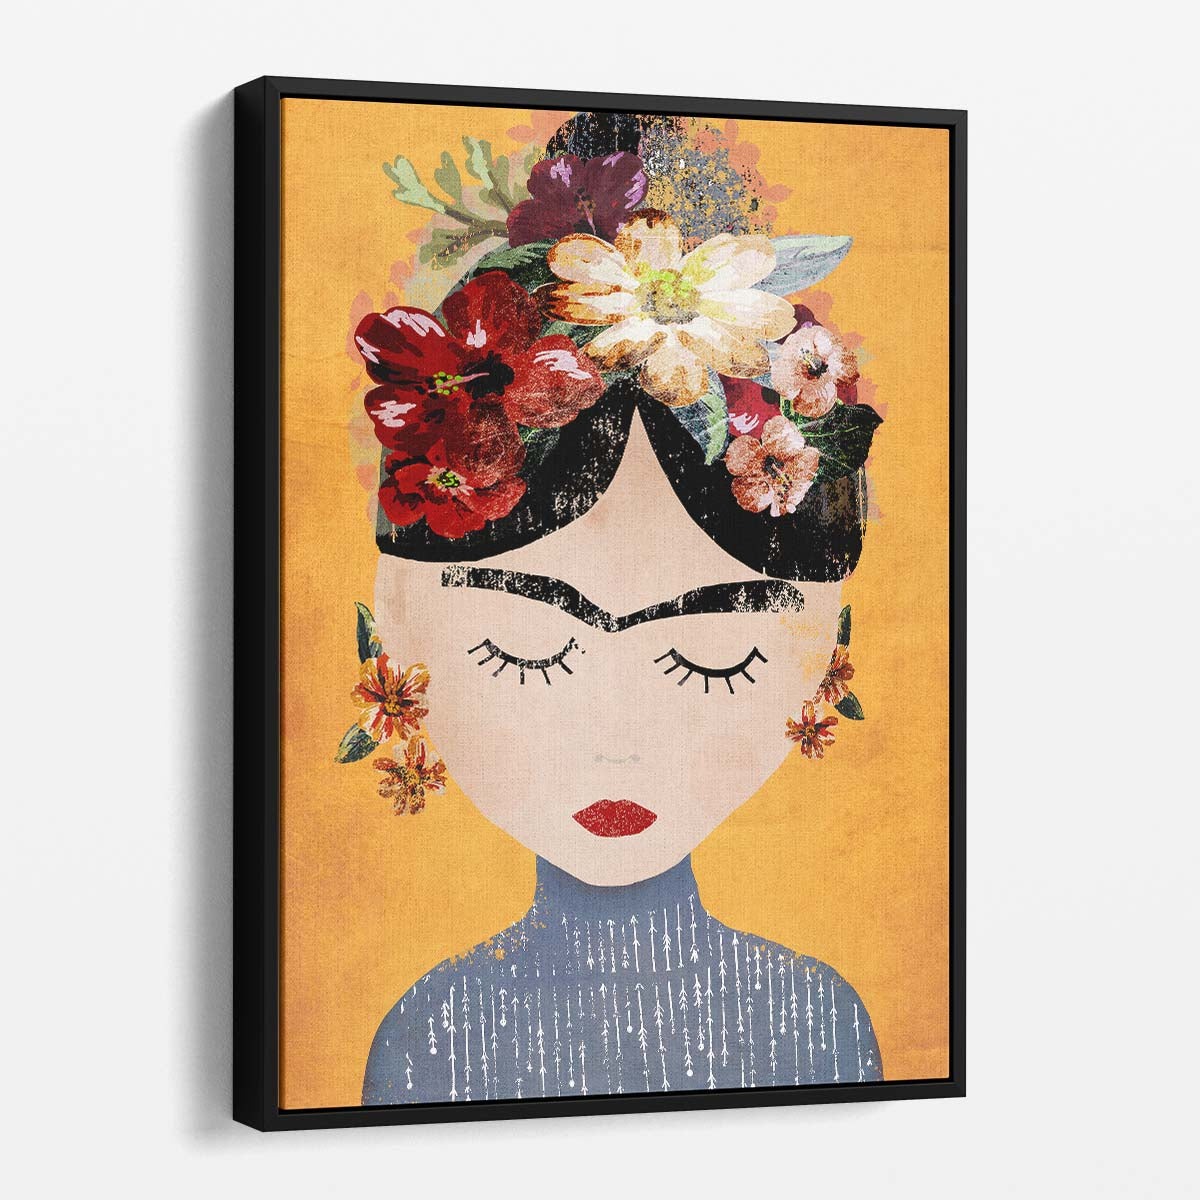 Frida Kahlo Floral Portrait Illustration by Treechild in Yellow by Luxuriance Designs, made in USA